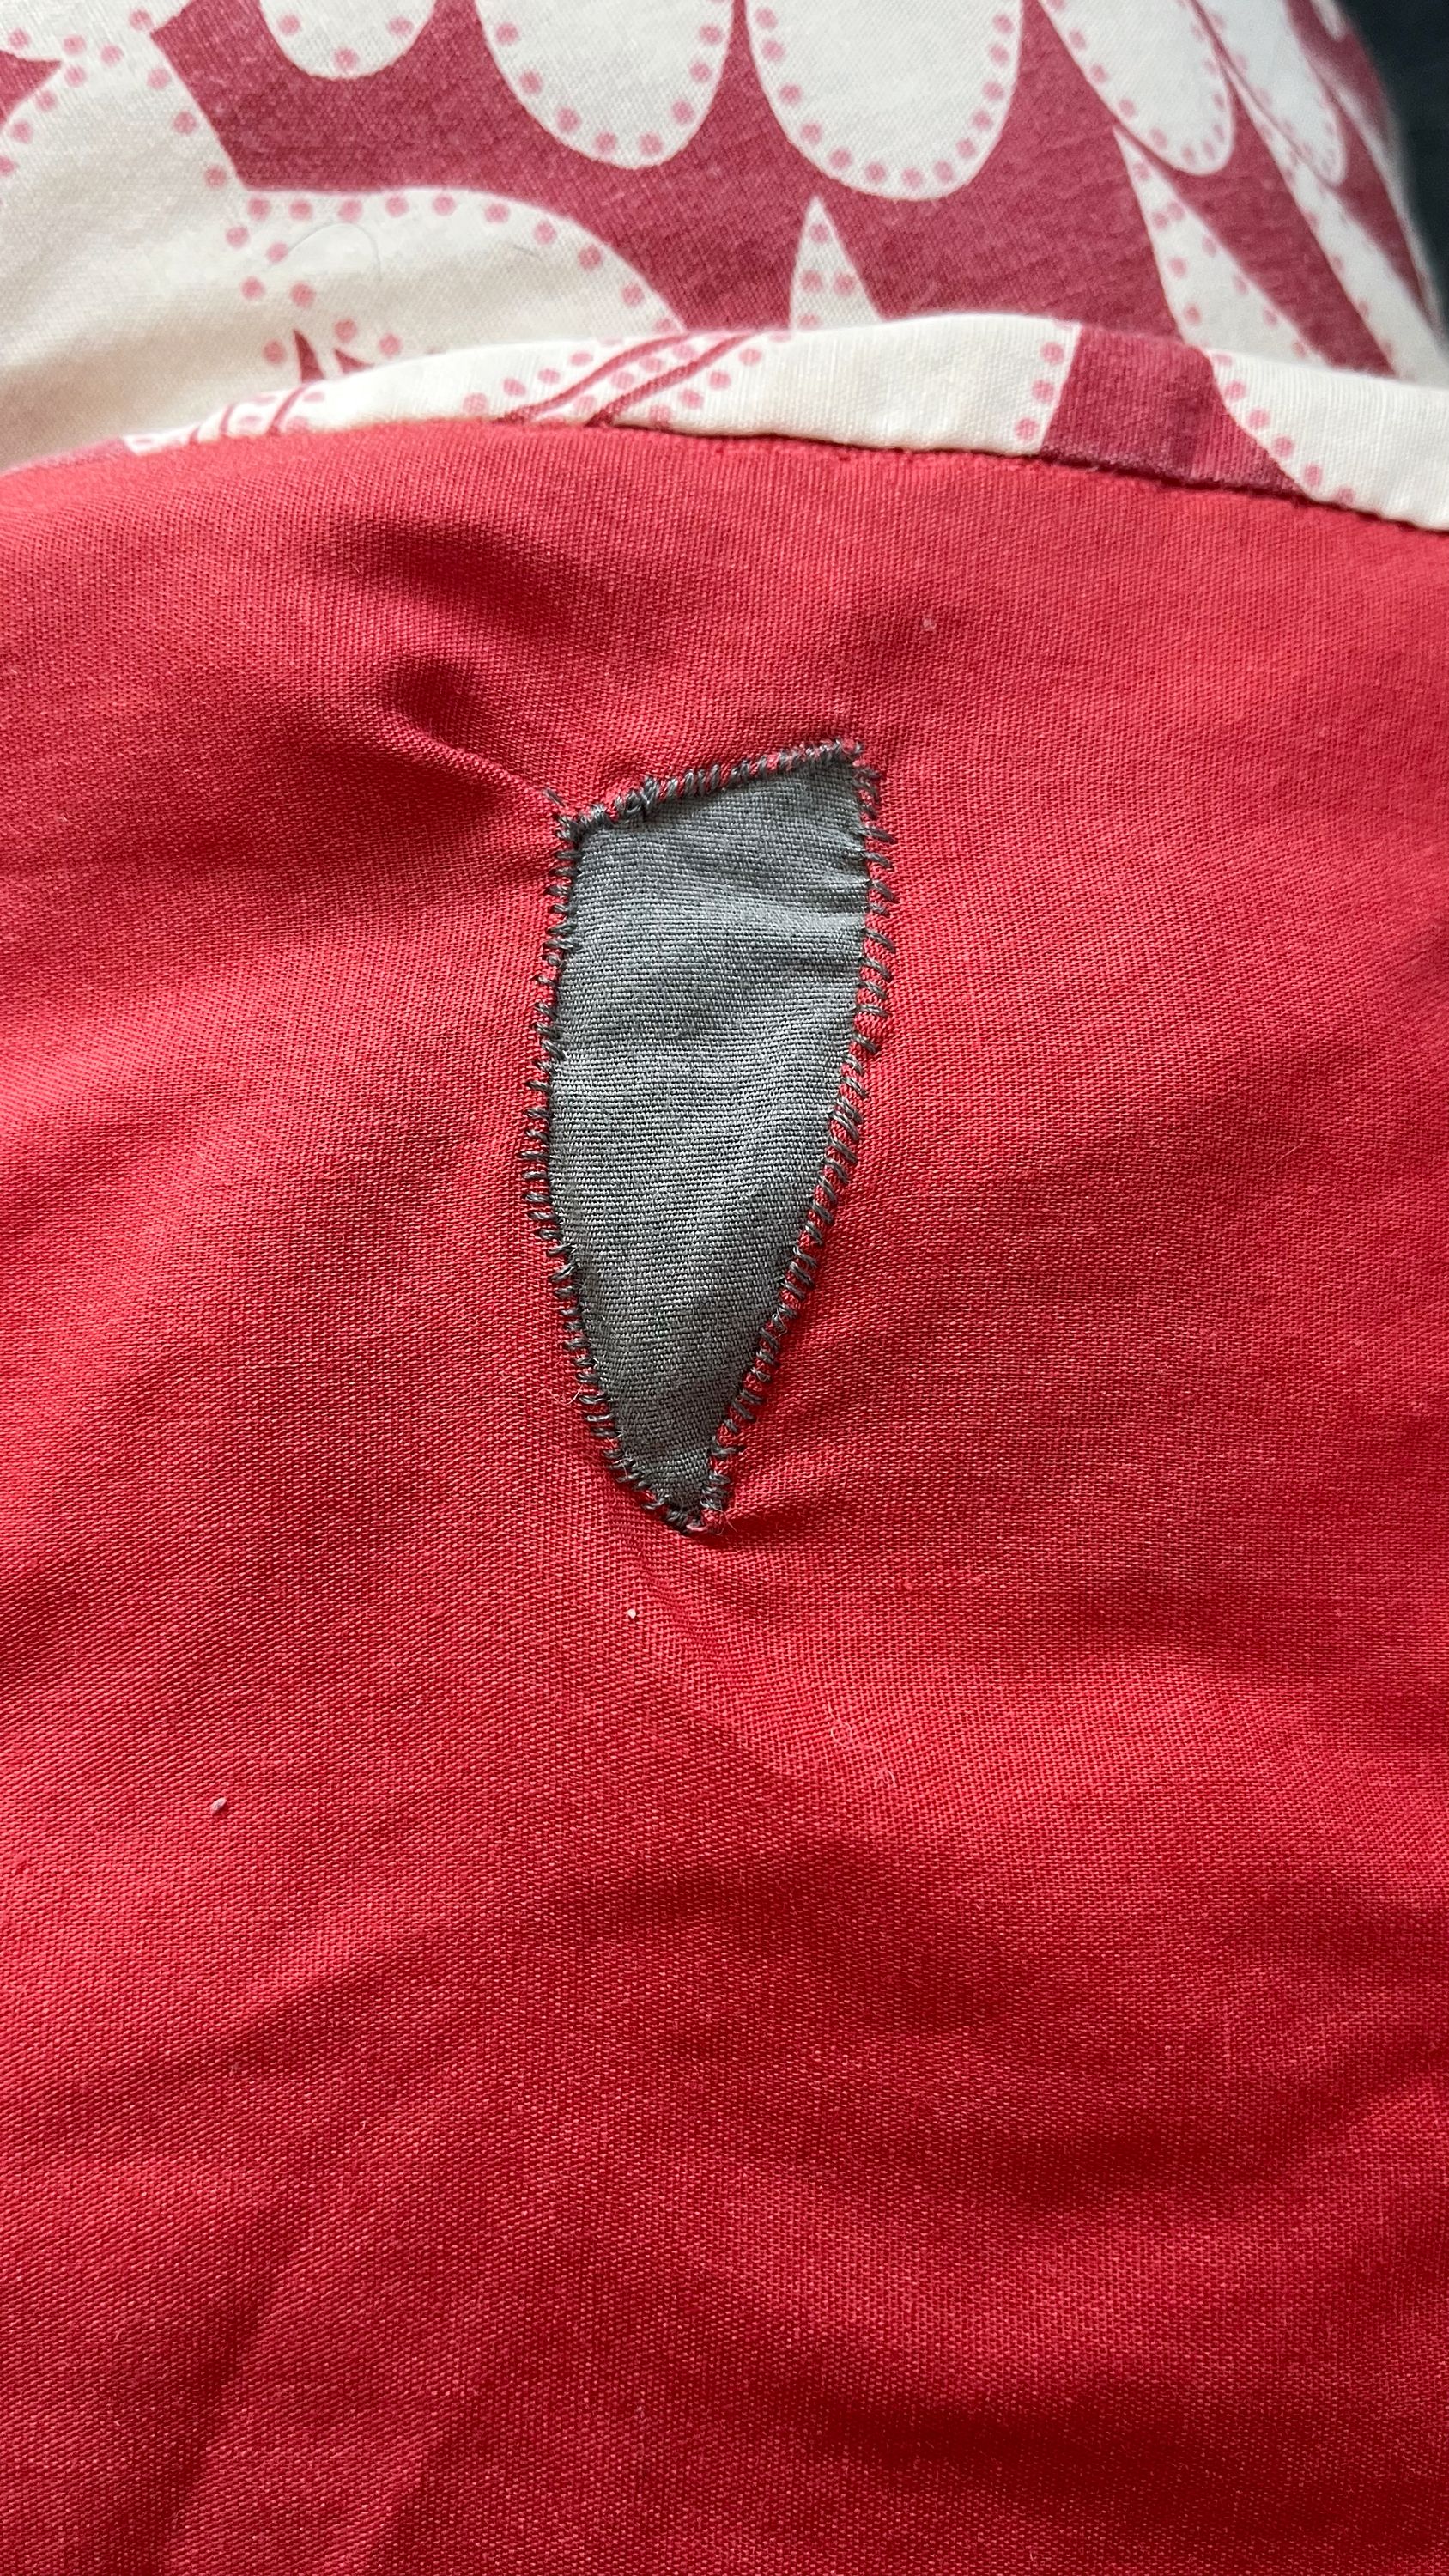 Our spare blanket, patched with a little bit of love. Hey, only our visiting dog-friends use it, it doesn’t need to match!